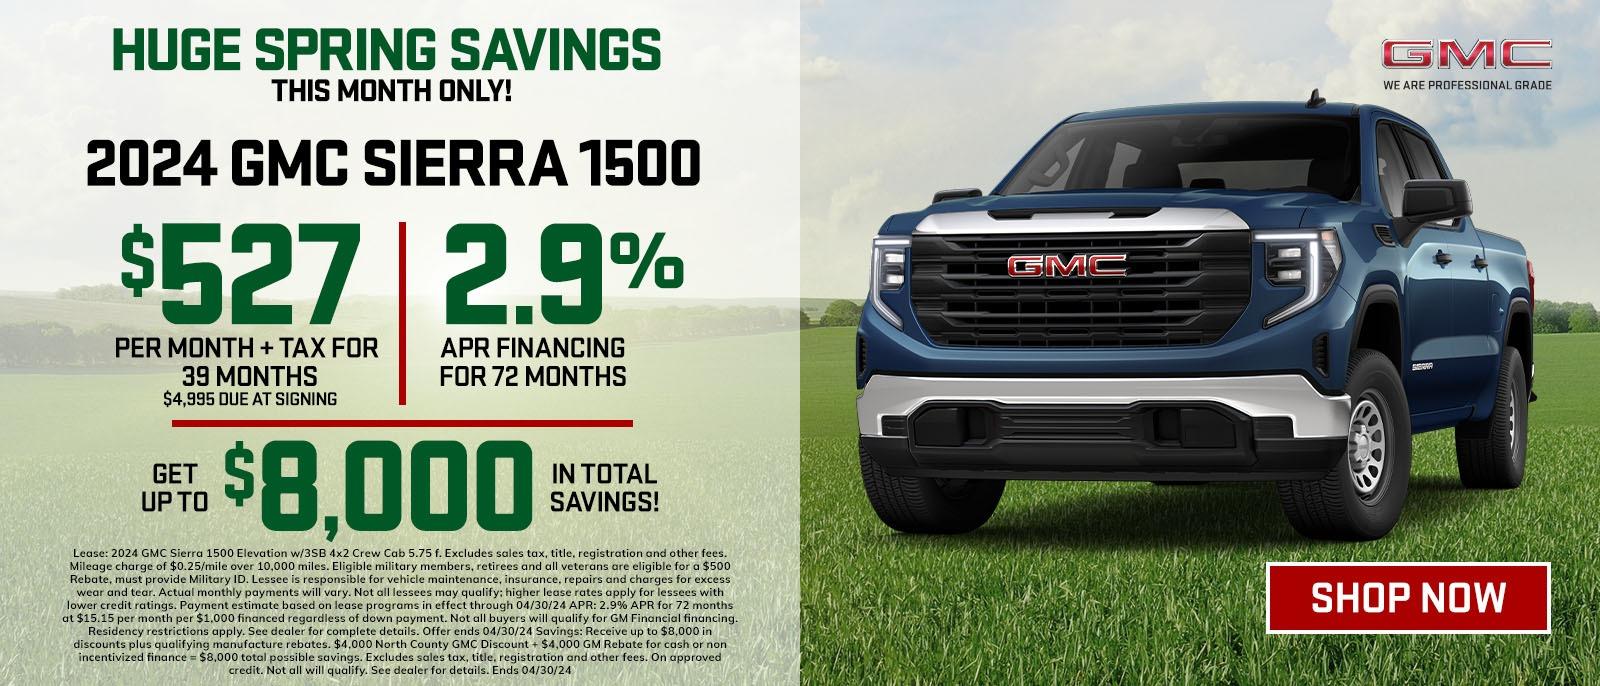 HUGE SPRING SAVINGS 
THIS MONTH ONLY
2024 GMC SIERRA 1,500
$527 PER MONTH + TAX FOR 39 MONTHS , $4,995 AT SIGNING 
2.9% APR FINANCING FOR 72 MONTHS
GET UPTO $8,000 IN TOTAL SAVING